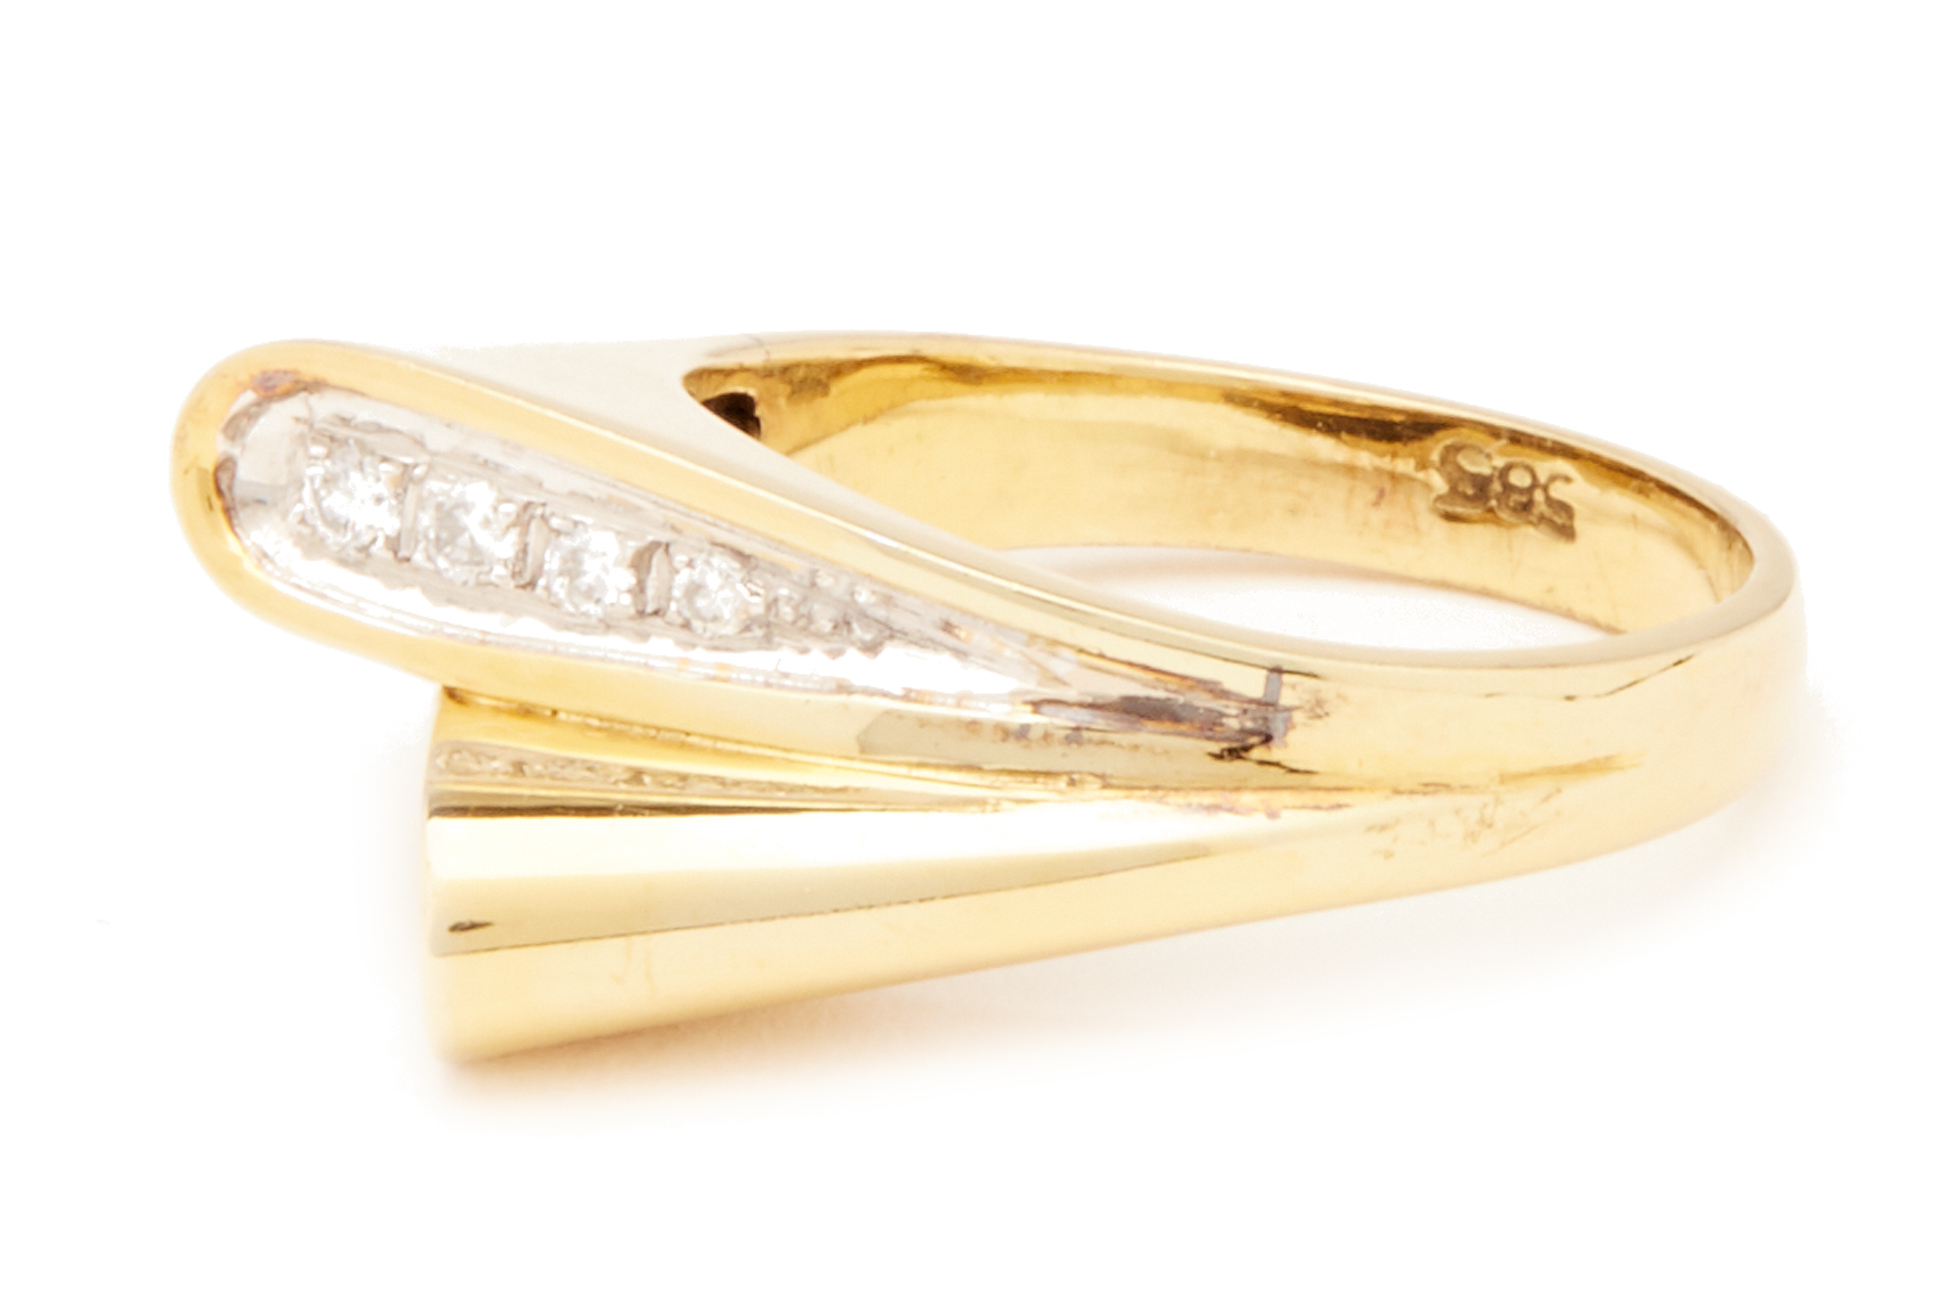 A SCULPTURAL GOLD AND DIAMOND RING - Image 2 of 2